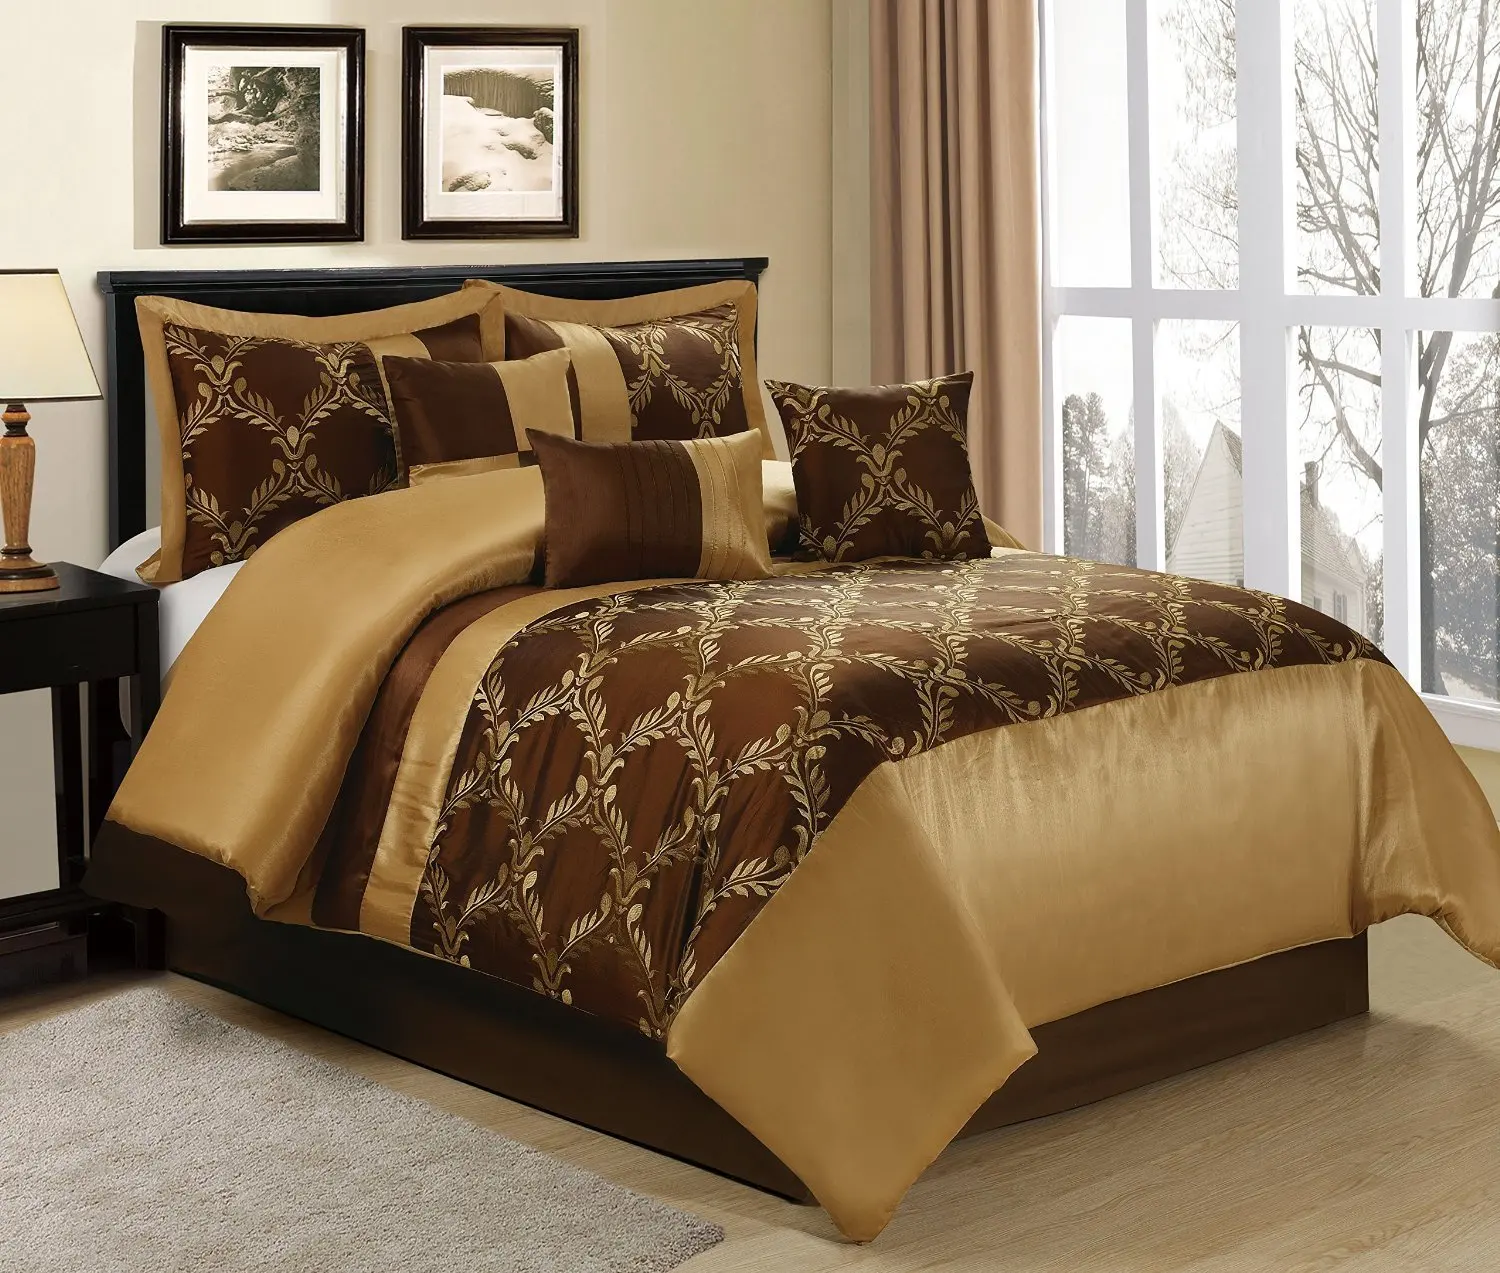 Cheap Brown King Comforter, find Brown King Comforter deals on line at ...